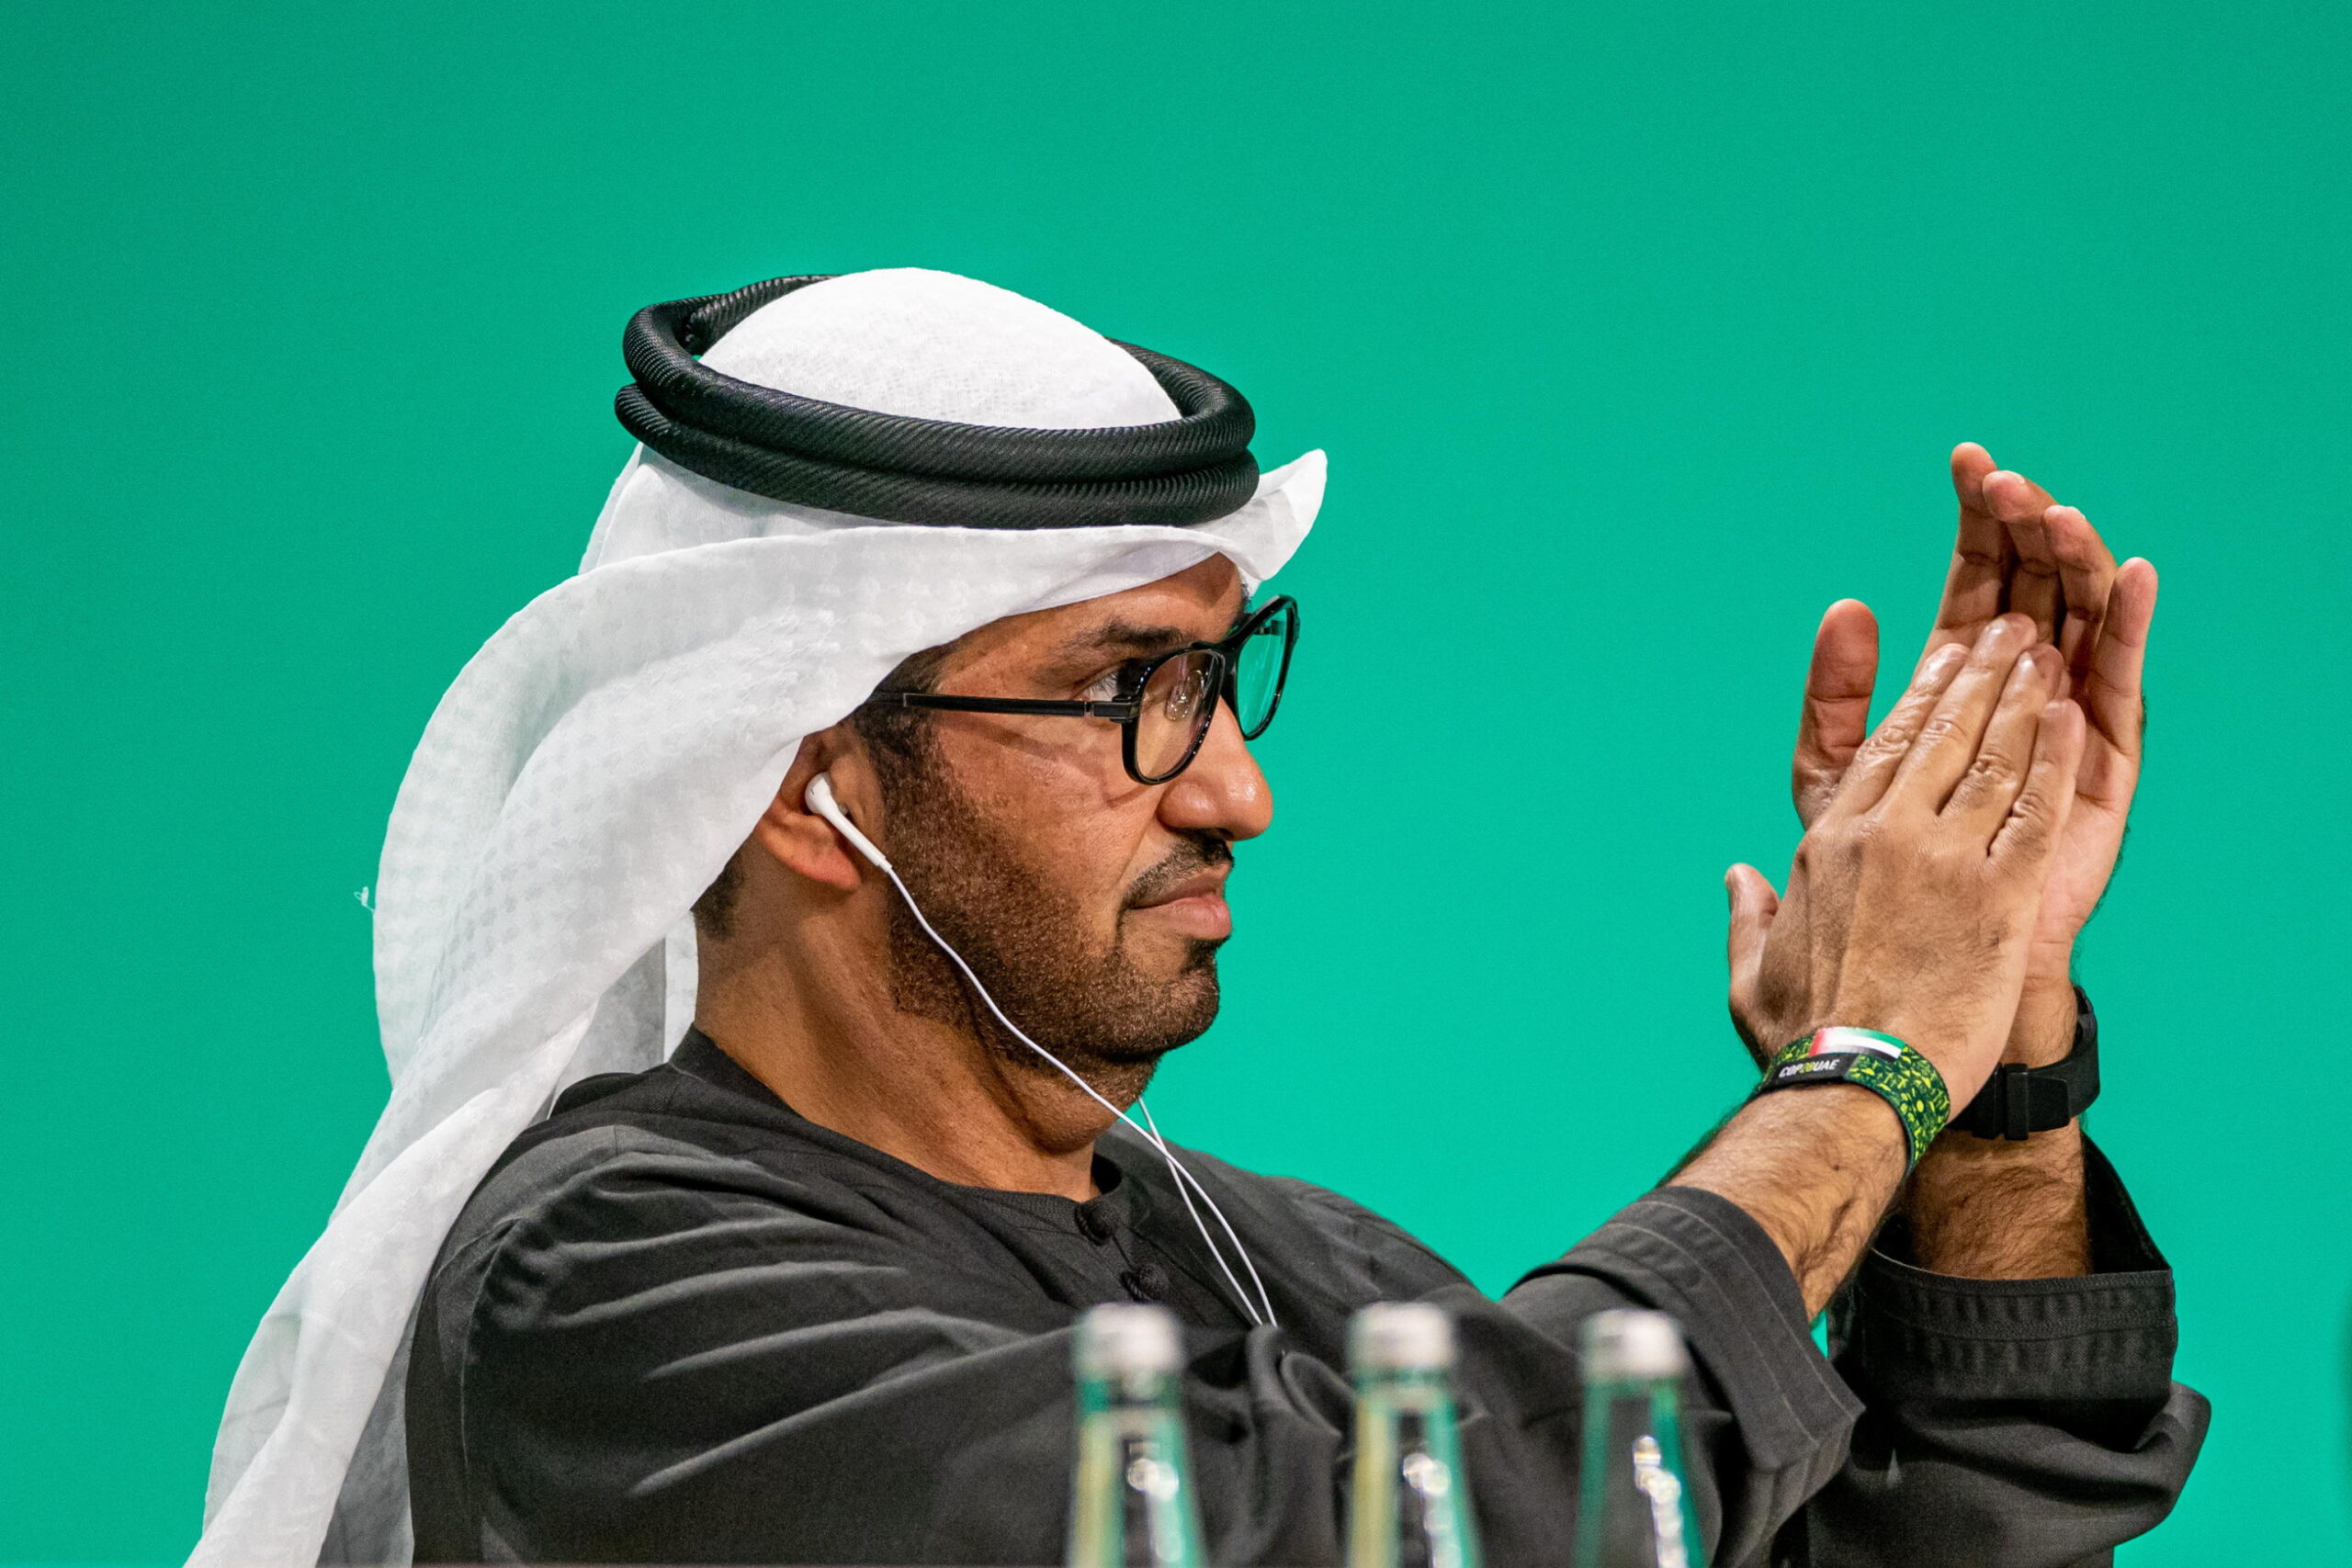 epa11023063 President of COP28 and UAE's Minister for Industry and Advanced Technology Dr. Sultan Ahmed Al Jaber claps during the 2023 United Nations Climate Change Conference (COP28), in Dubai, United Arab Emirates, 11 December 2023. The 2023 United Nations Climate Change Conference (COP28), runs from 30 November to 12 December, and is expected to host one of the largest number of participants in the annual global climate conference as over 70,000 estimated attendees, including the member states of the UN Framework Convention on Climate Change (UNFCCC), business leaders, young people, climate scientists, Indigenous Peoples and other relevant stakeholders will attend.  EPA/MARTIN DIVISEK